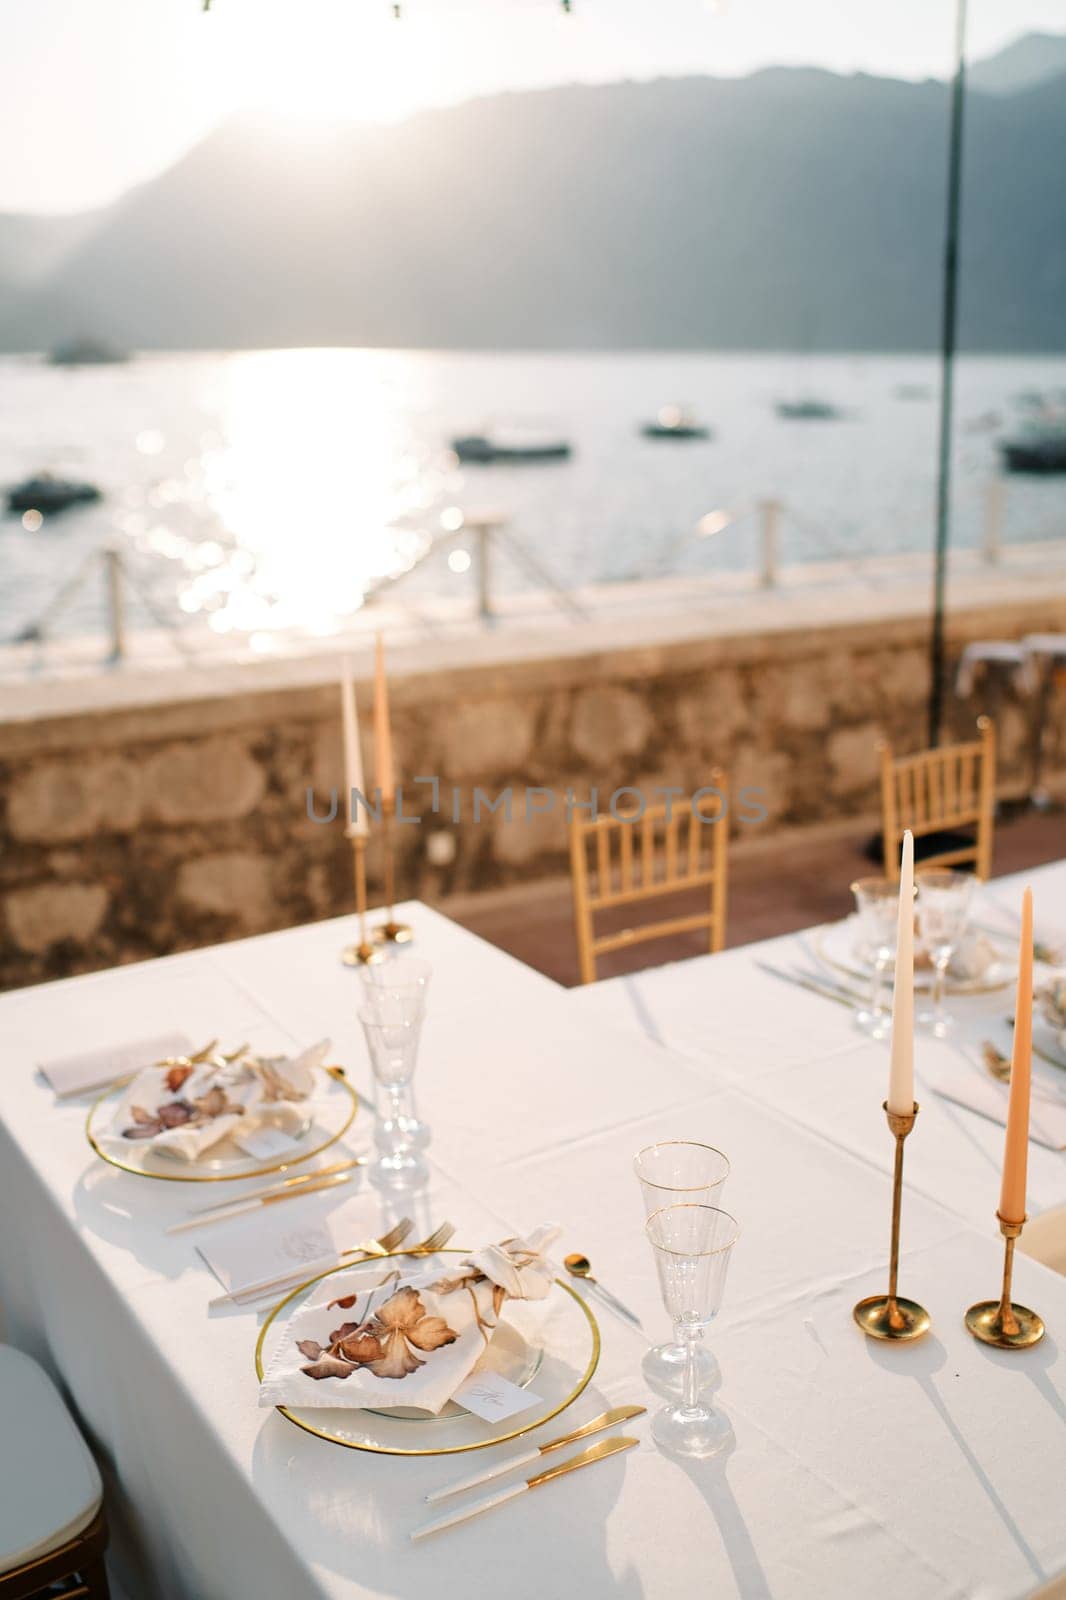 Bride and groom festive table with candles and menu stands on the terrace by the sea by Nadtochiy